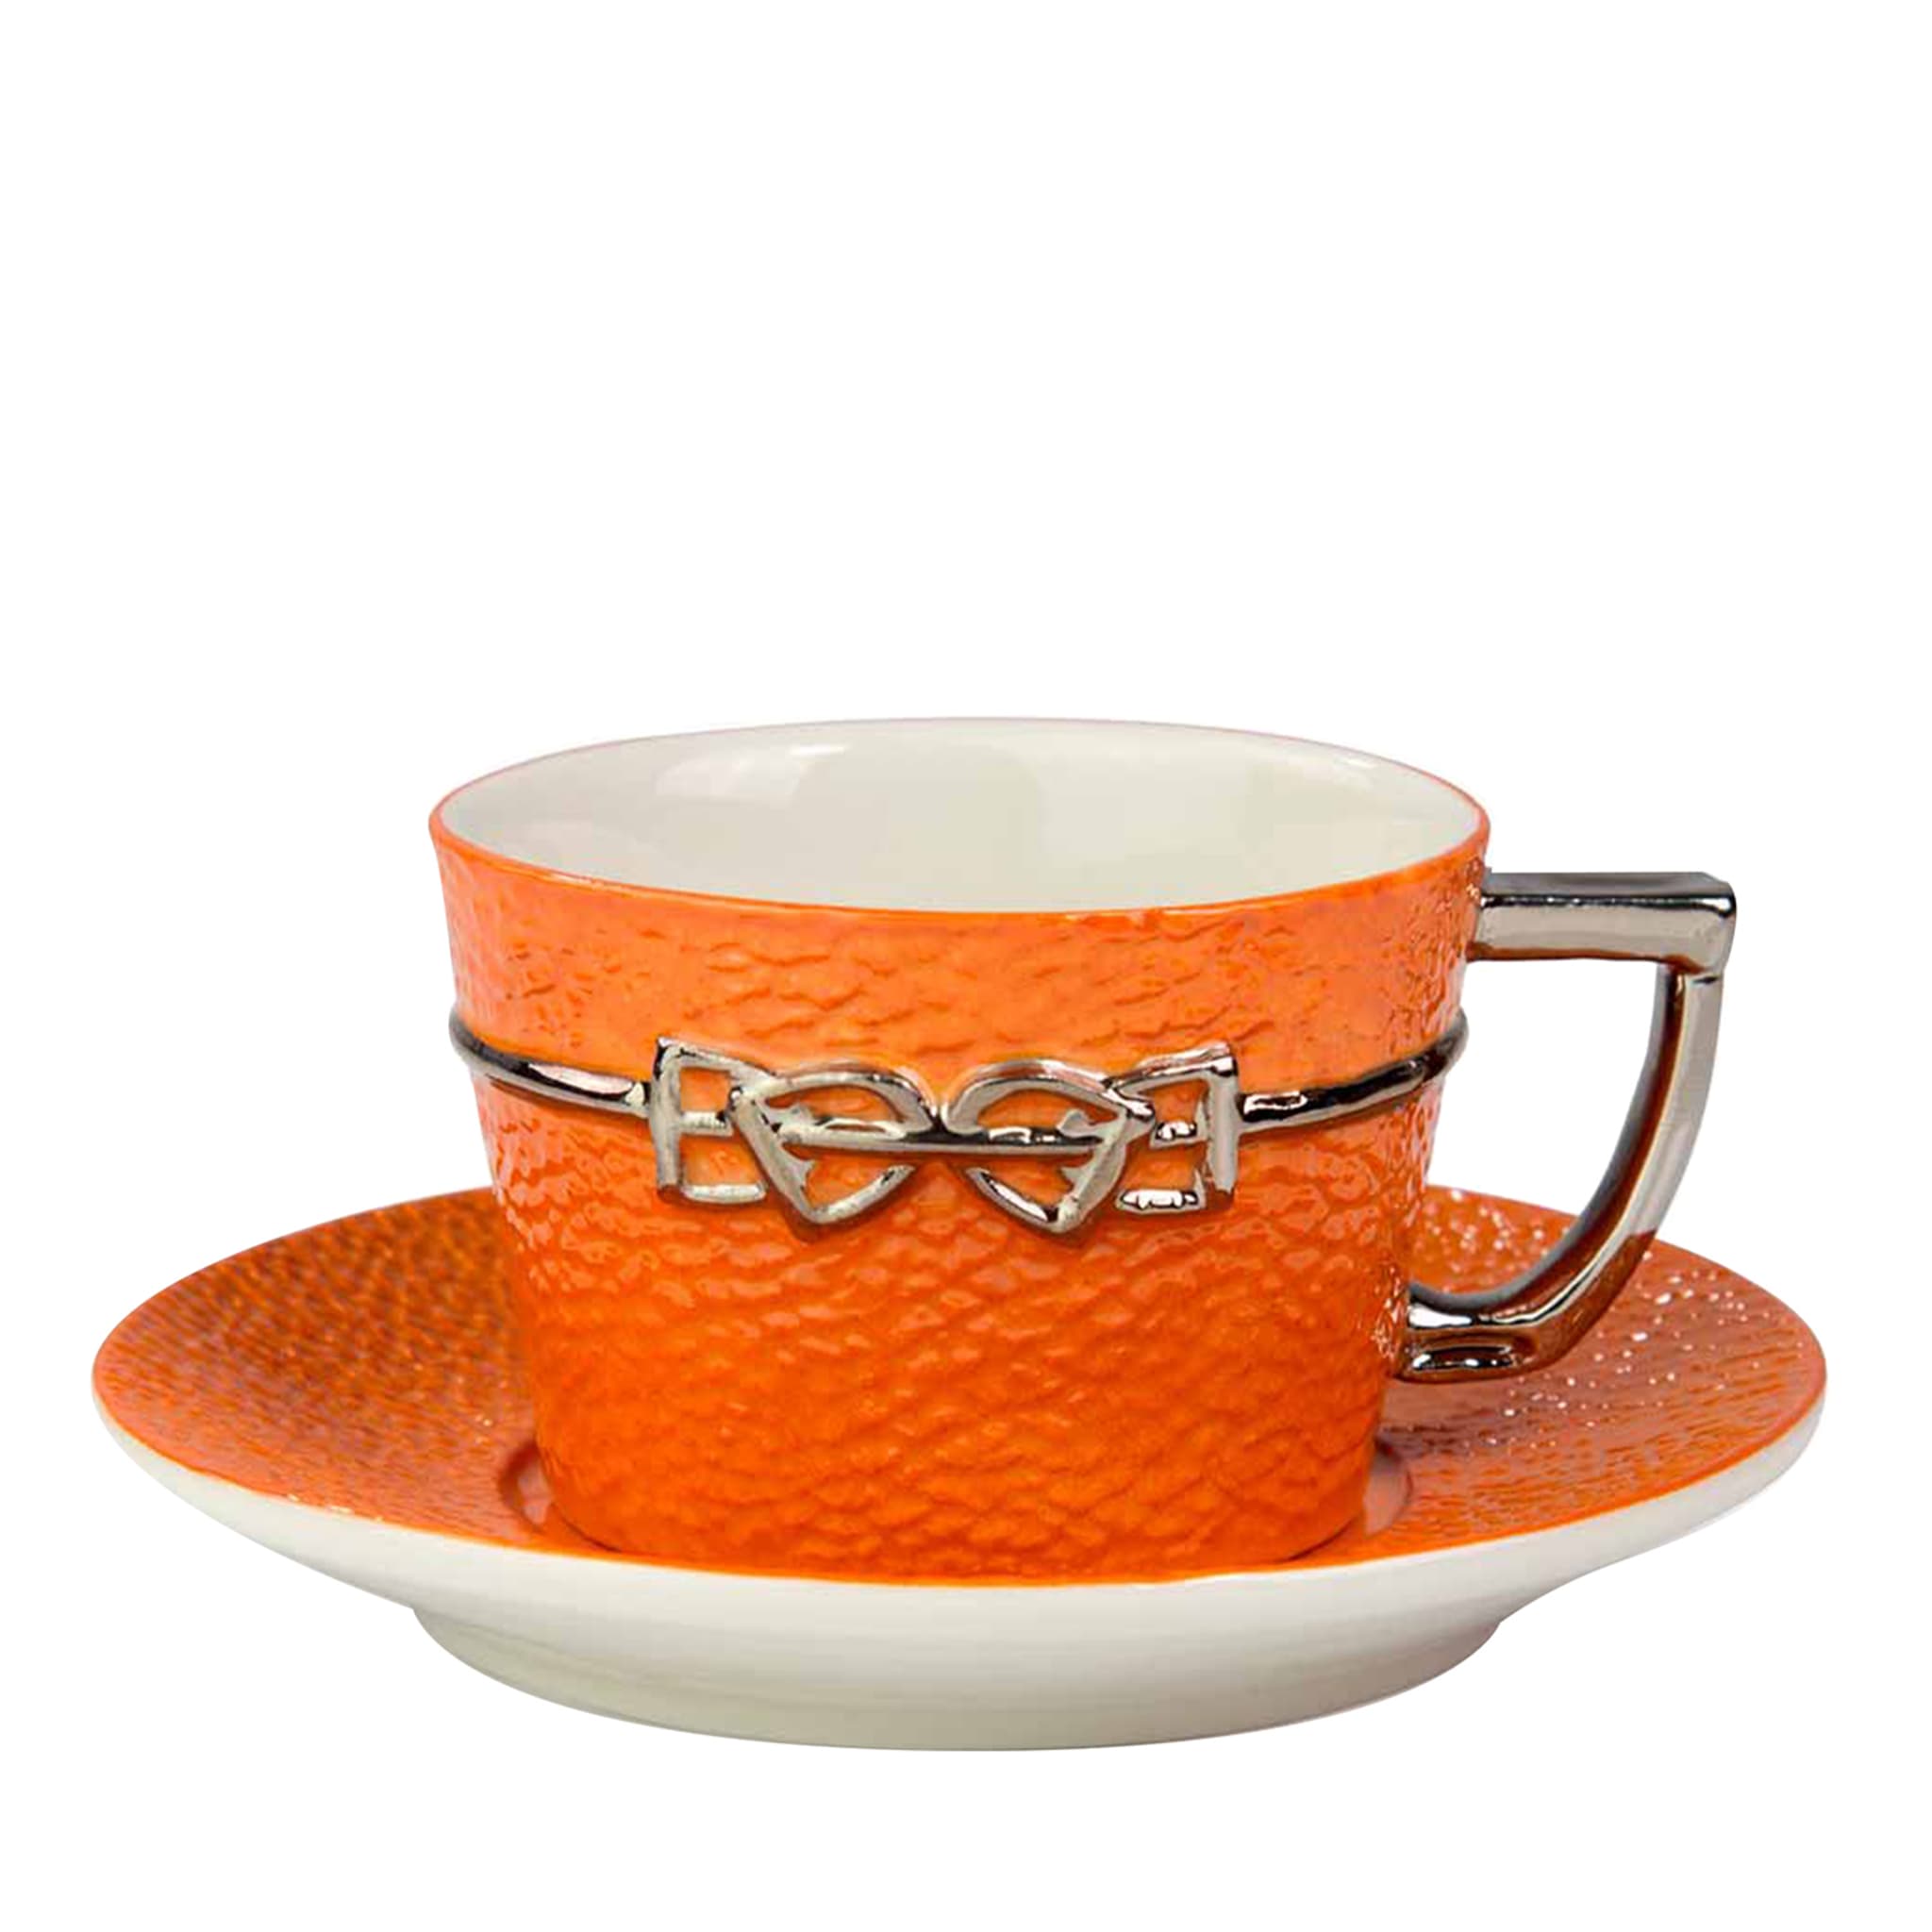 DRESSAGE COFFEE CUP AND SAUCER - ORANGE - Main view